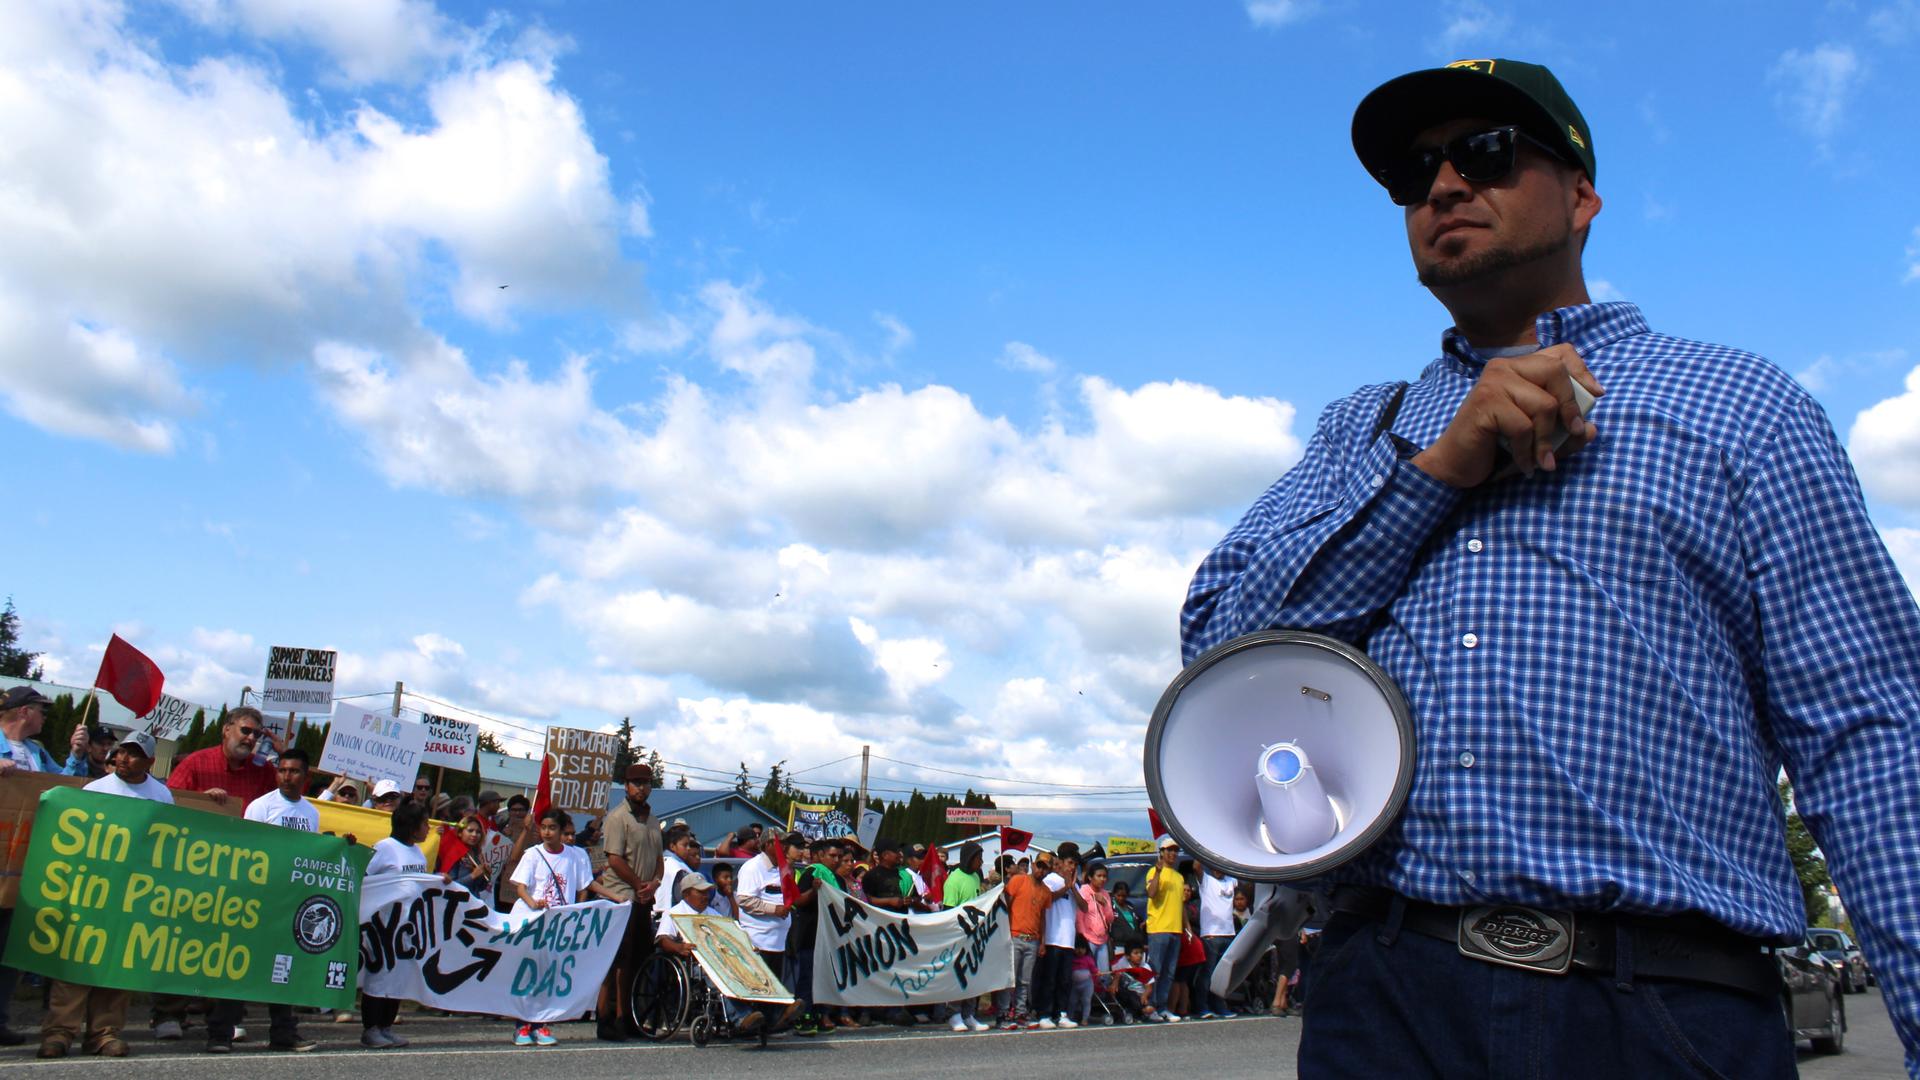 A man with a bullhorn stands in front of a line of protesters